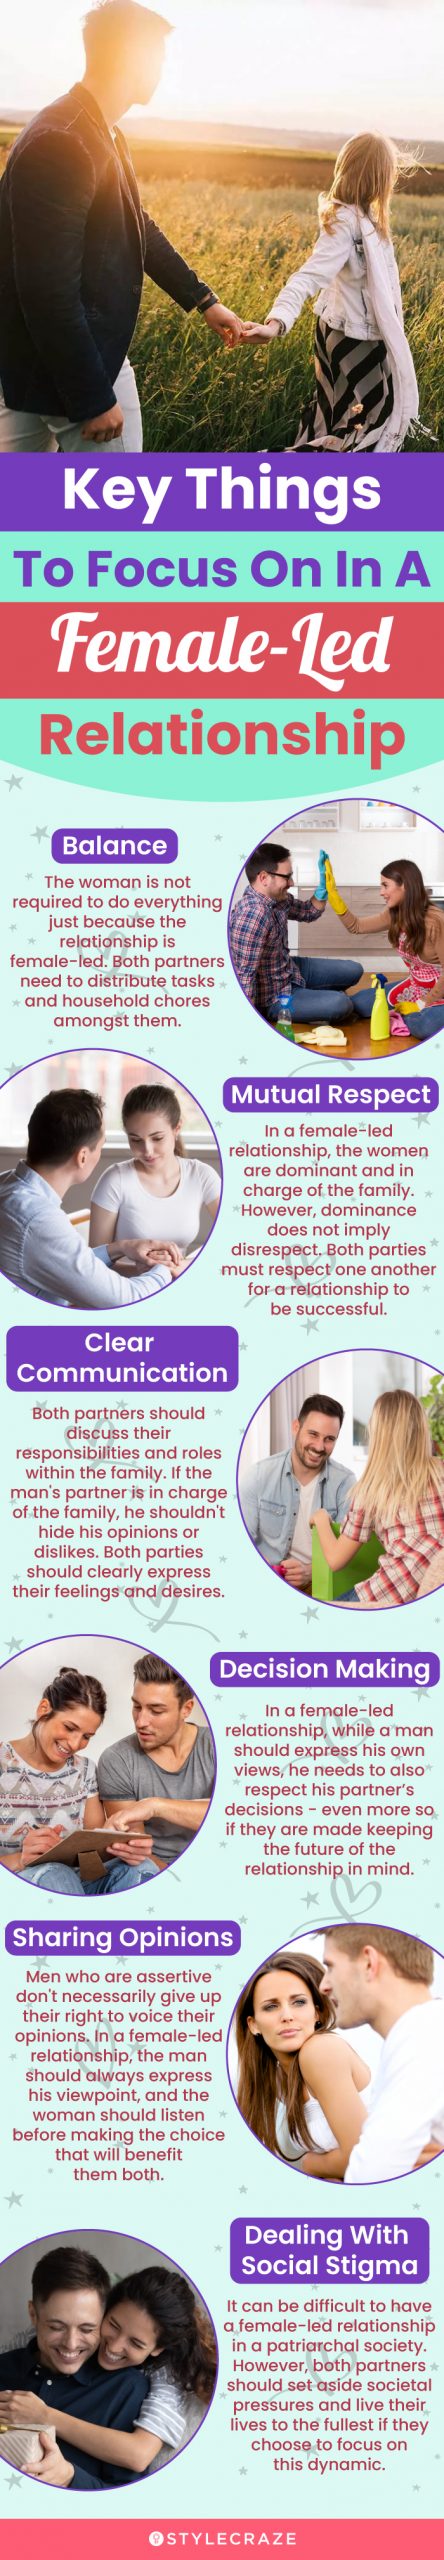 key things to focus on in a female led relationship (infographic)